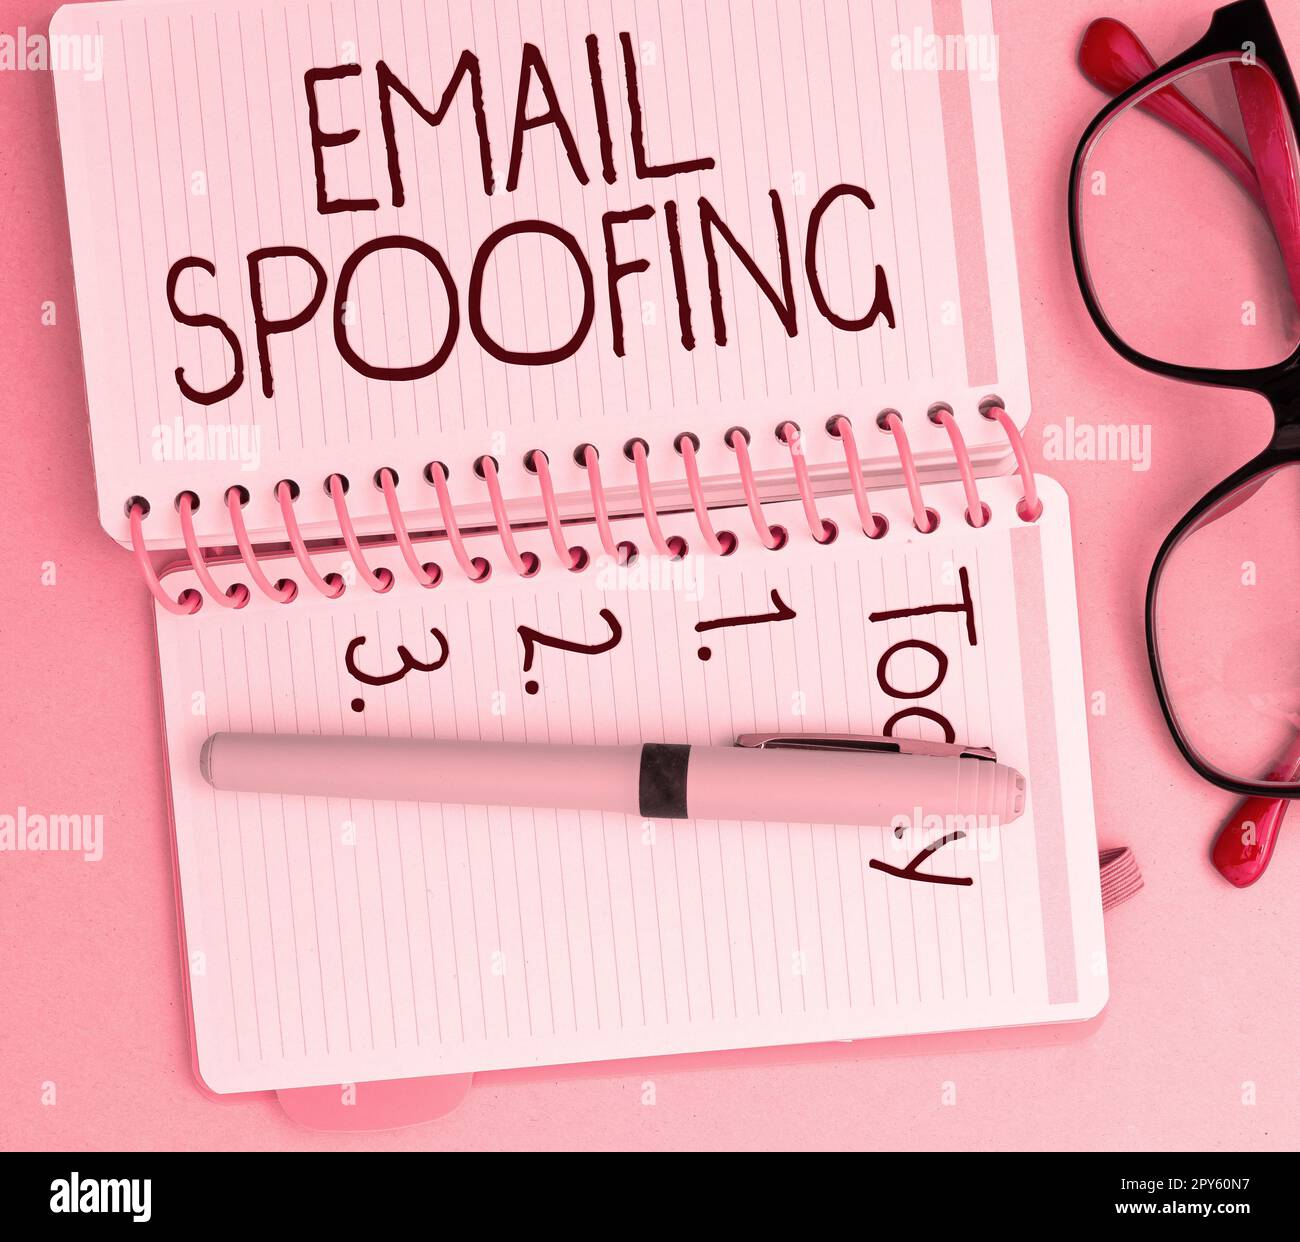 Writing displaying text Email Spoofing. Business idea secure the access and content of an email account or service Stock Photo